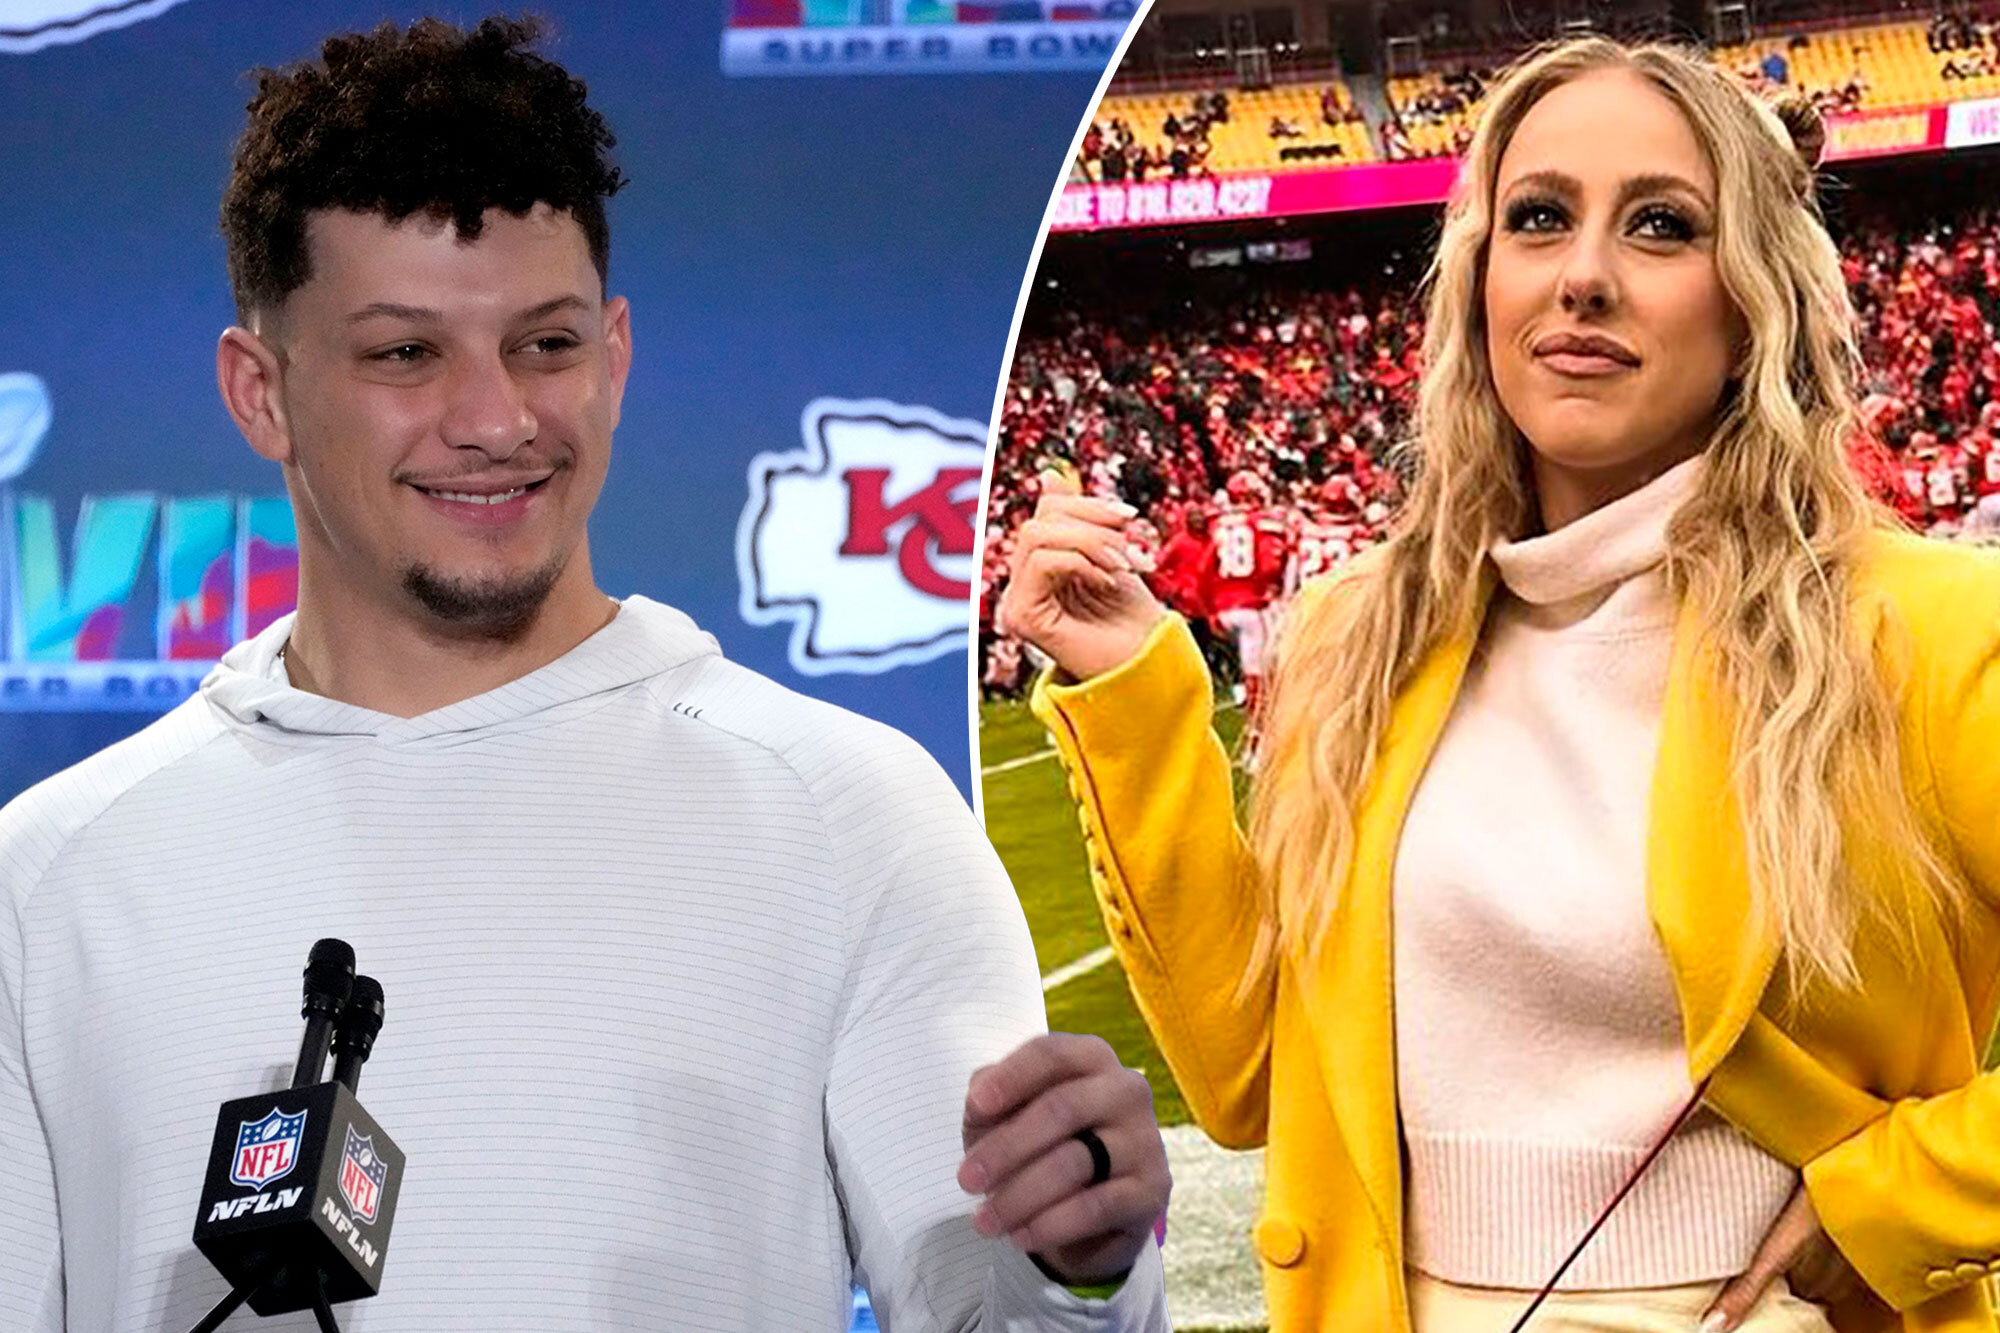 Patrick Mahomes, wife Brittany Matthews are the NFL's top power couple